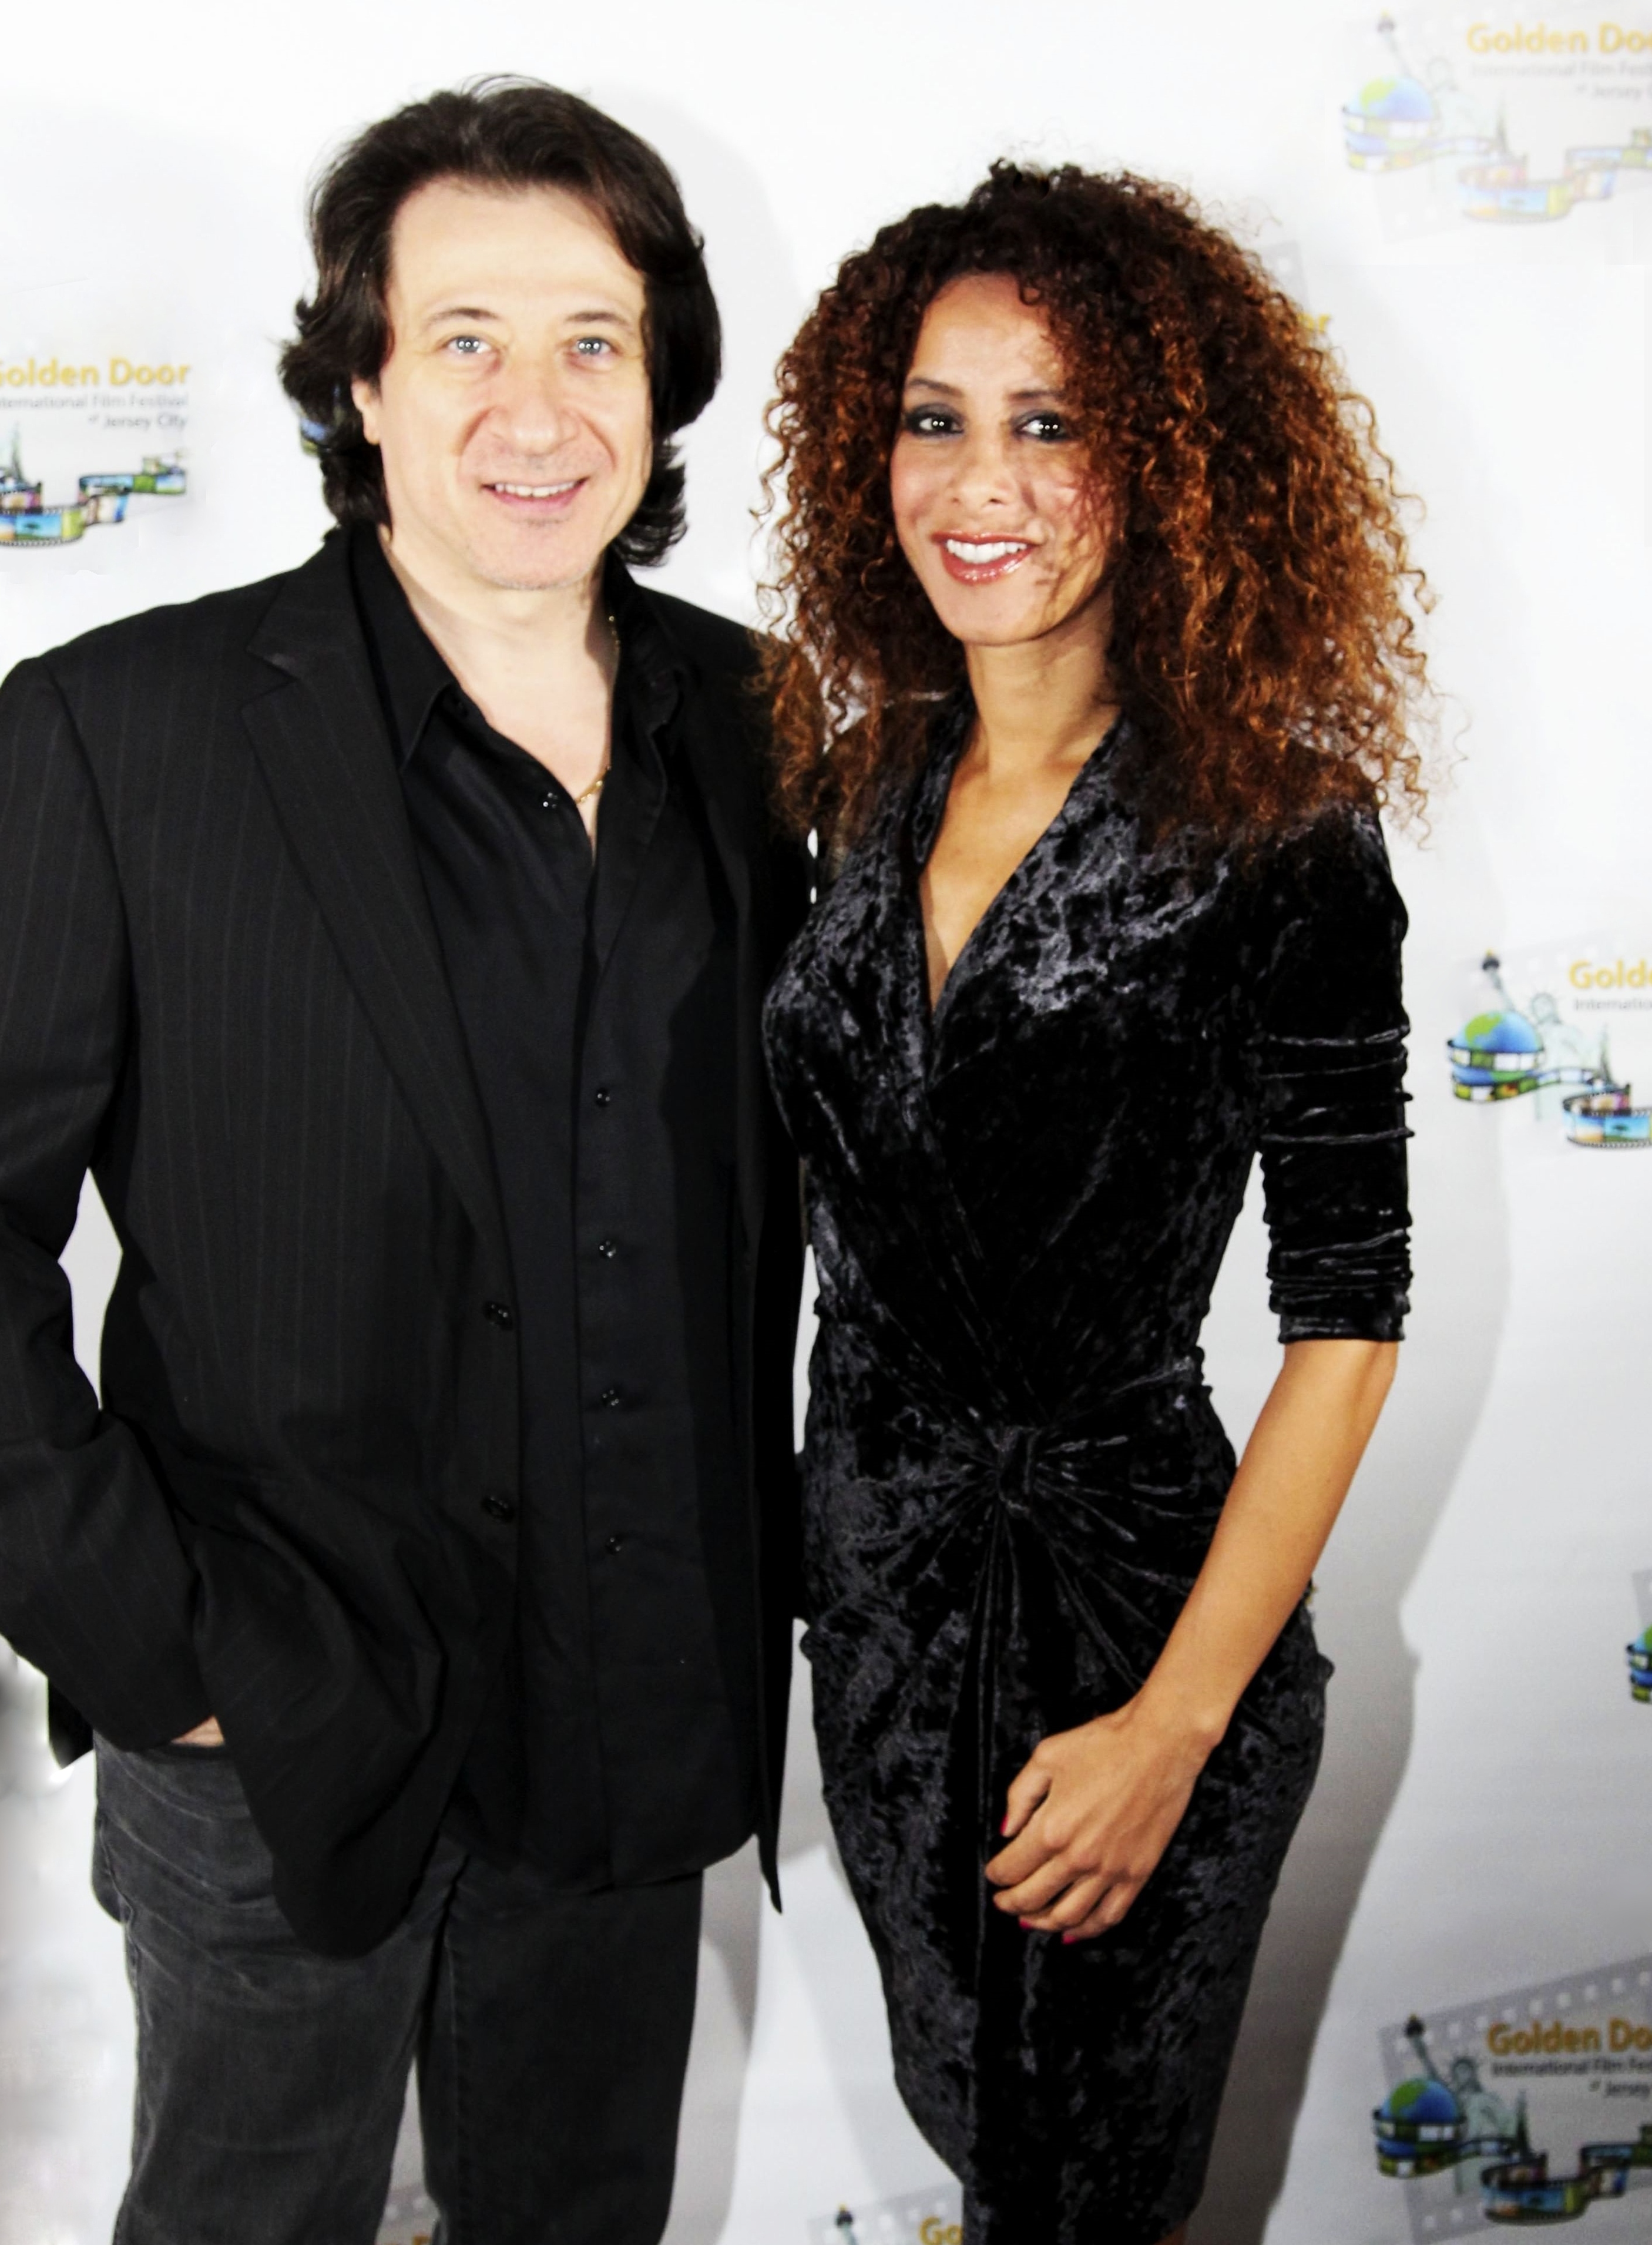 Actors Yvonne Maria Schaefer and Federico Castelluccio attend the Golden Door International Film Festival at the Landmark Loews Theatre in Jersey City